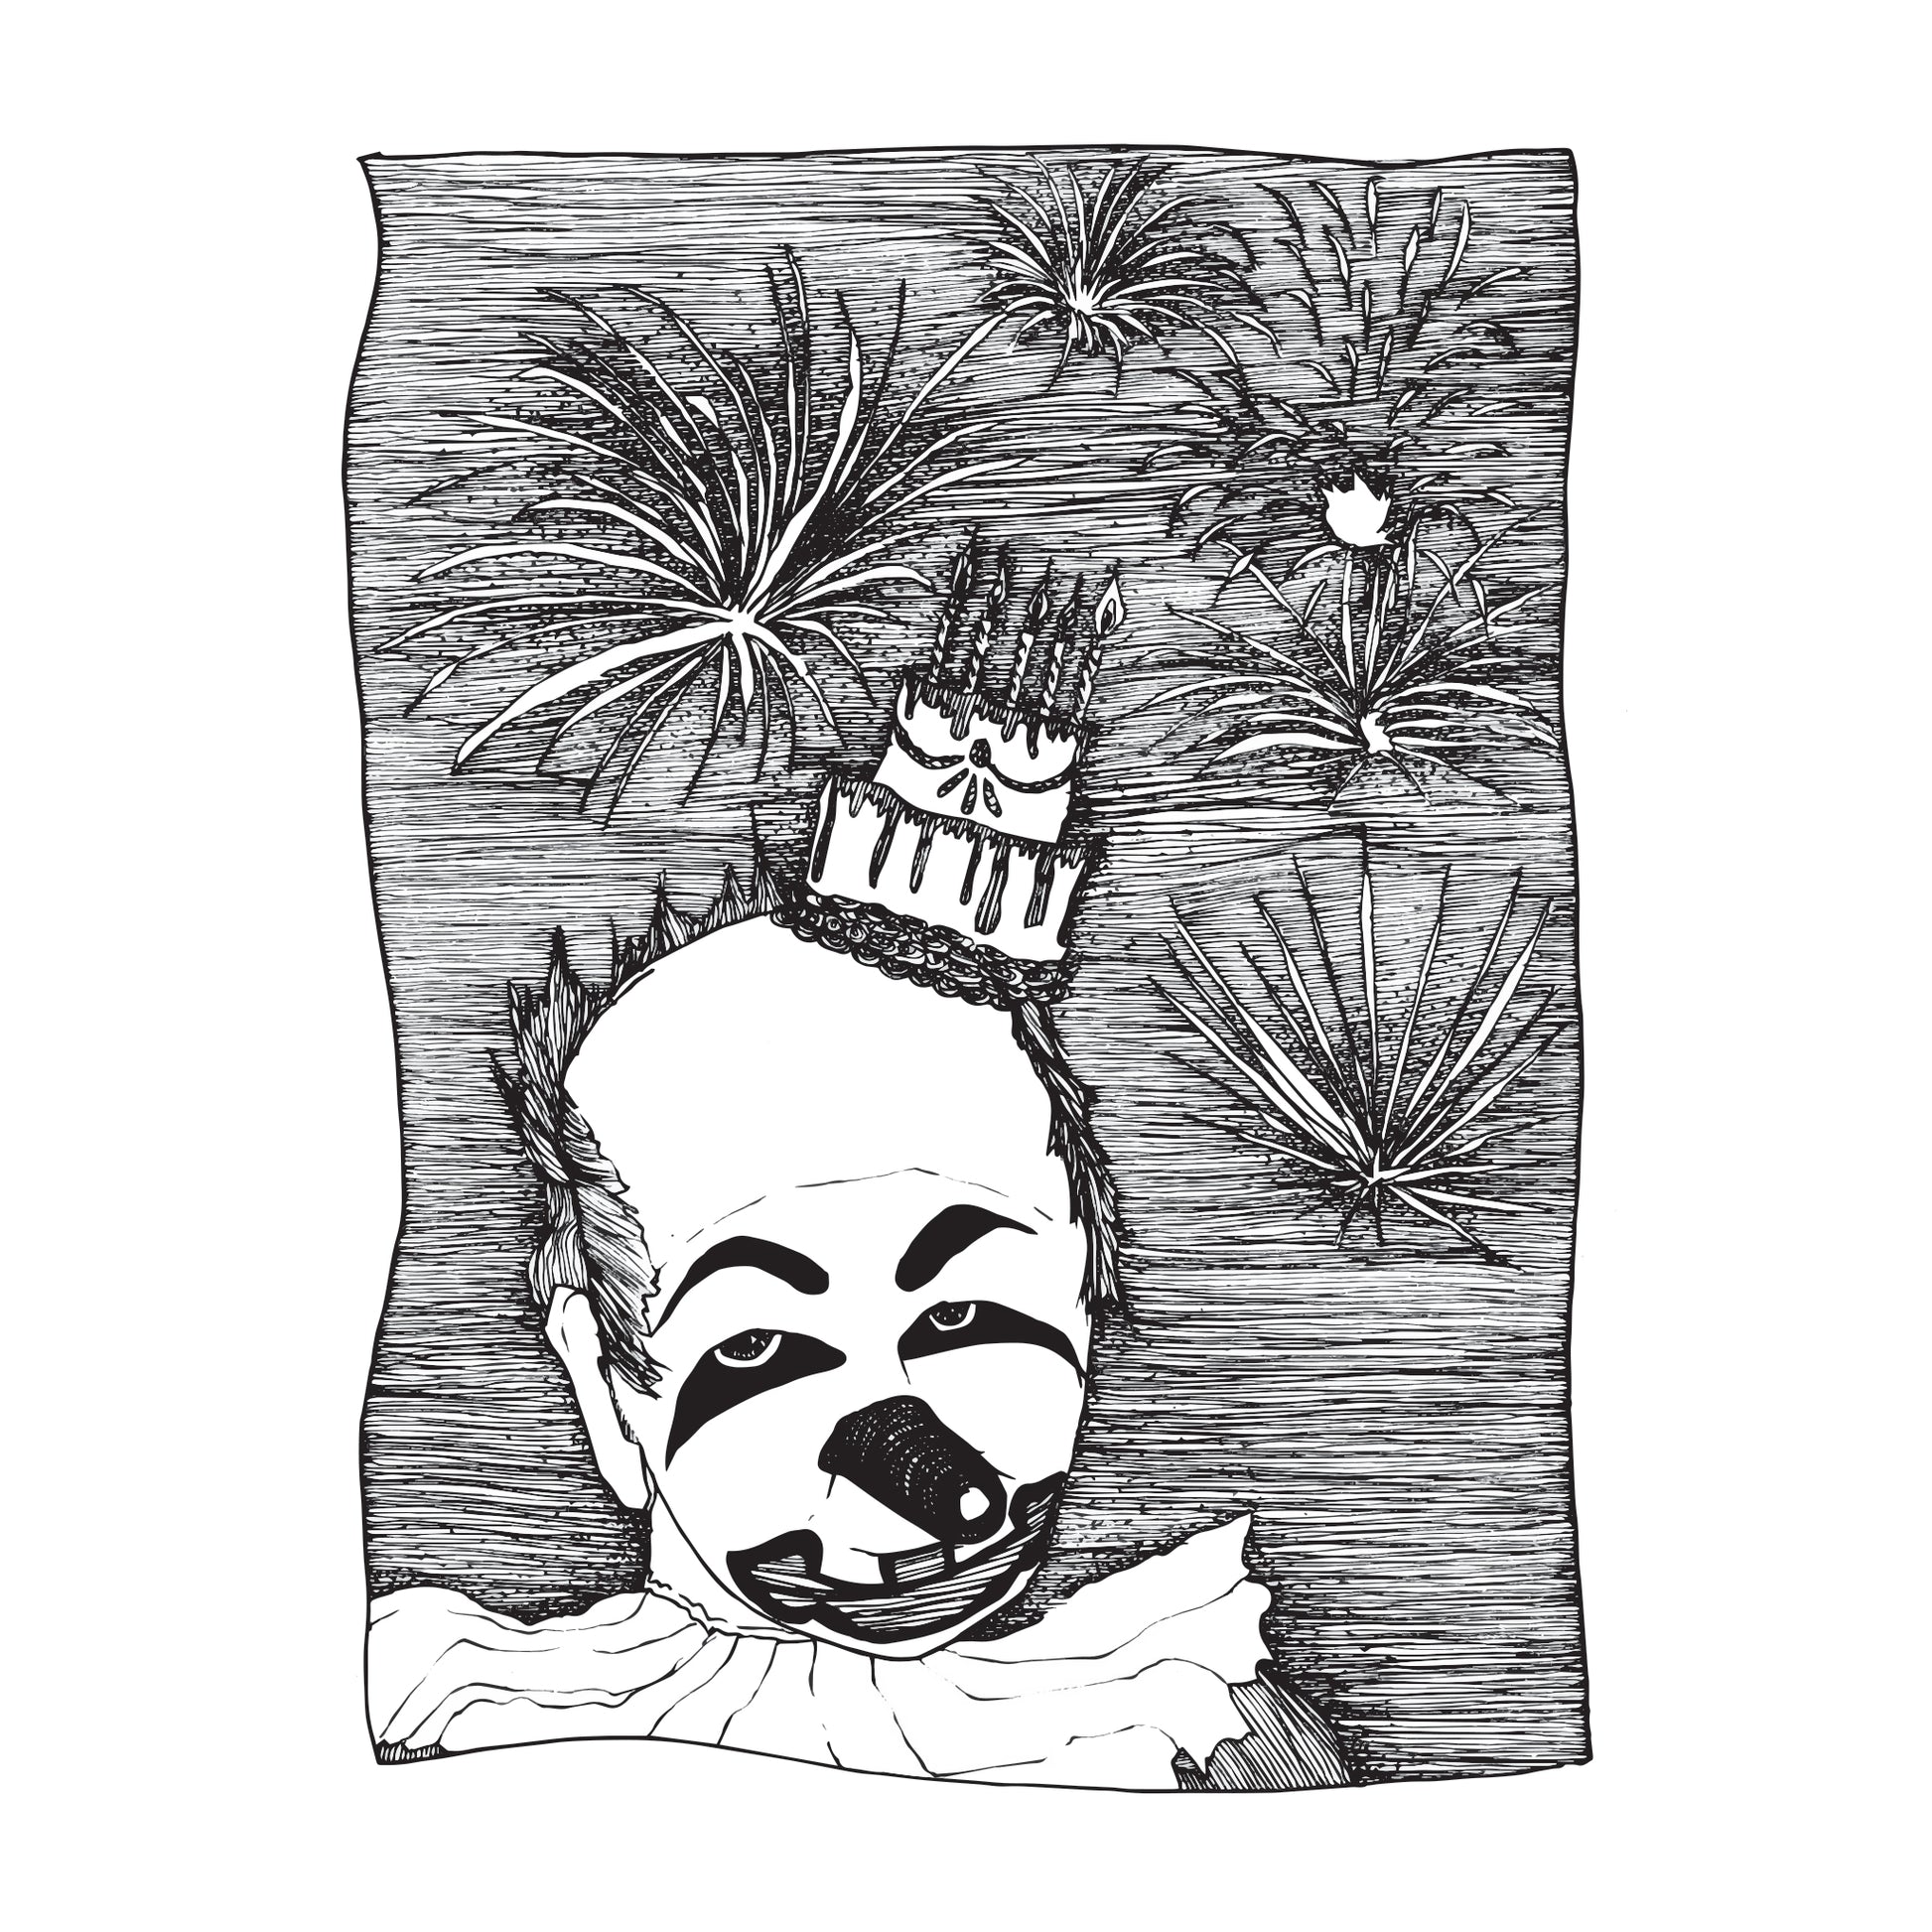 black and white illustration of a creepy clown, staring at you, with a birthday cake hat, with 5 lit candles, as fireworks go off over the clown's head